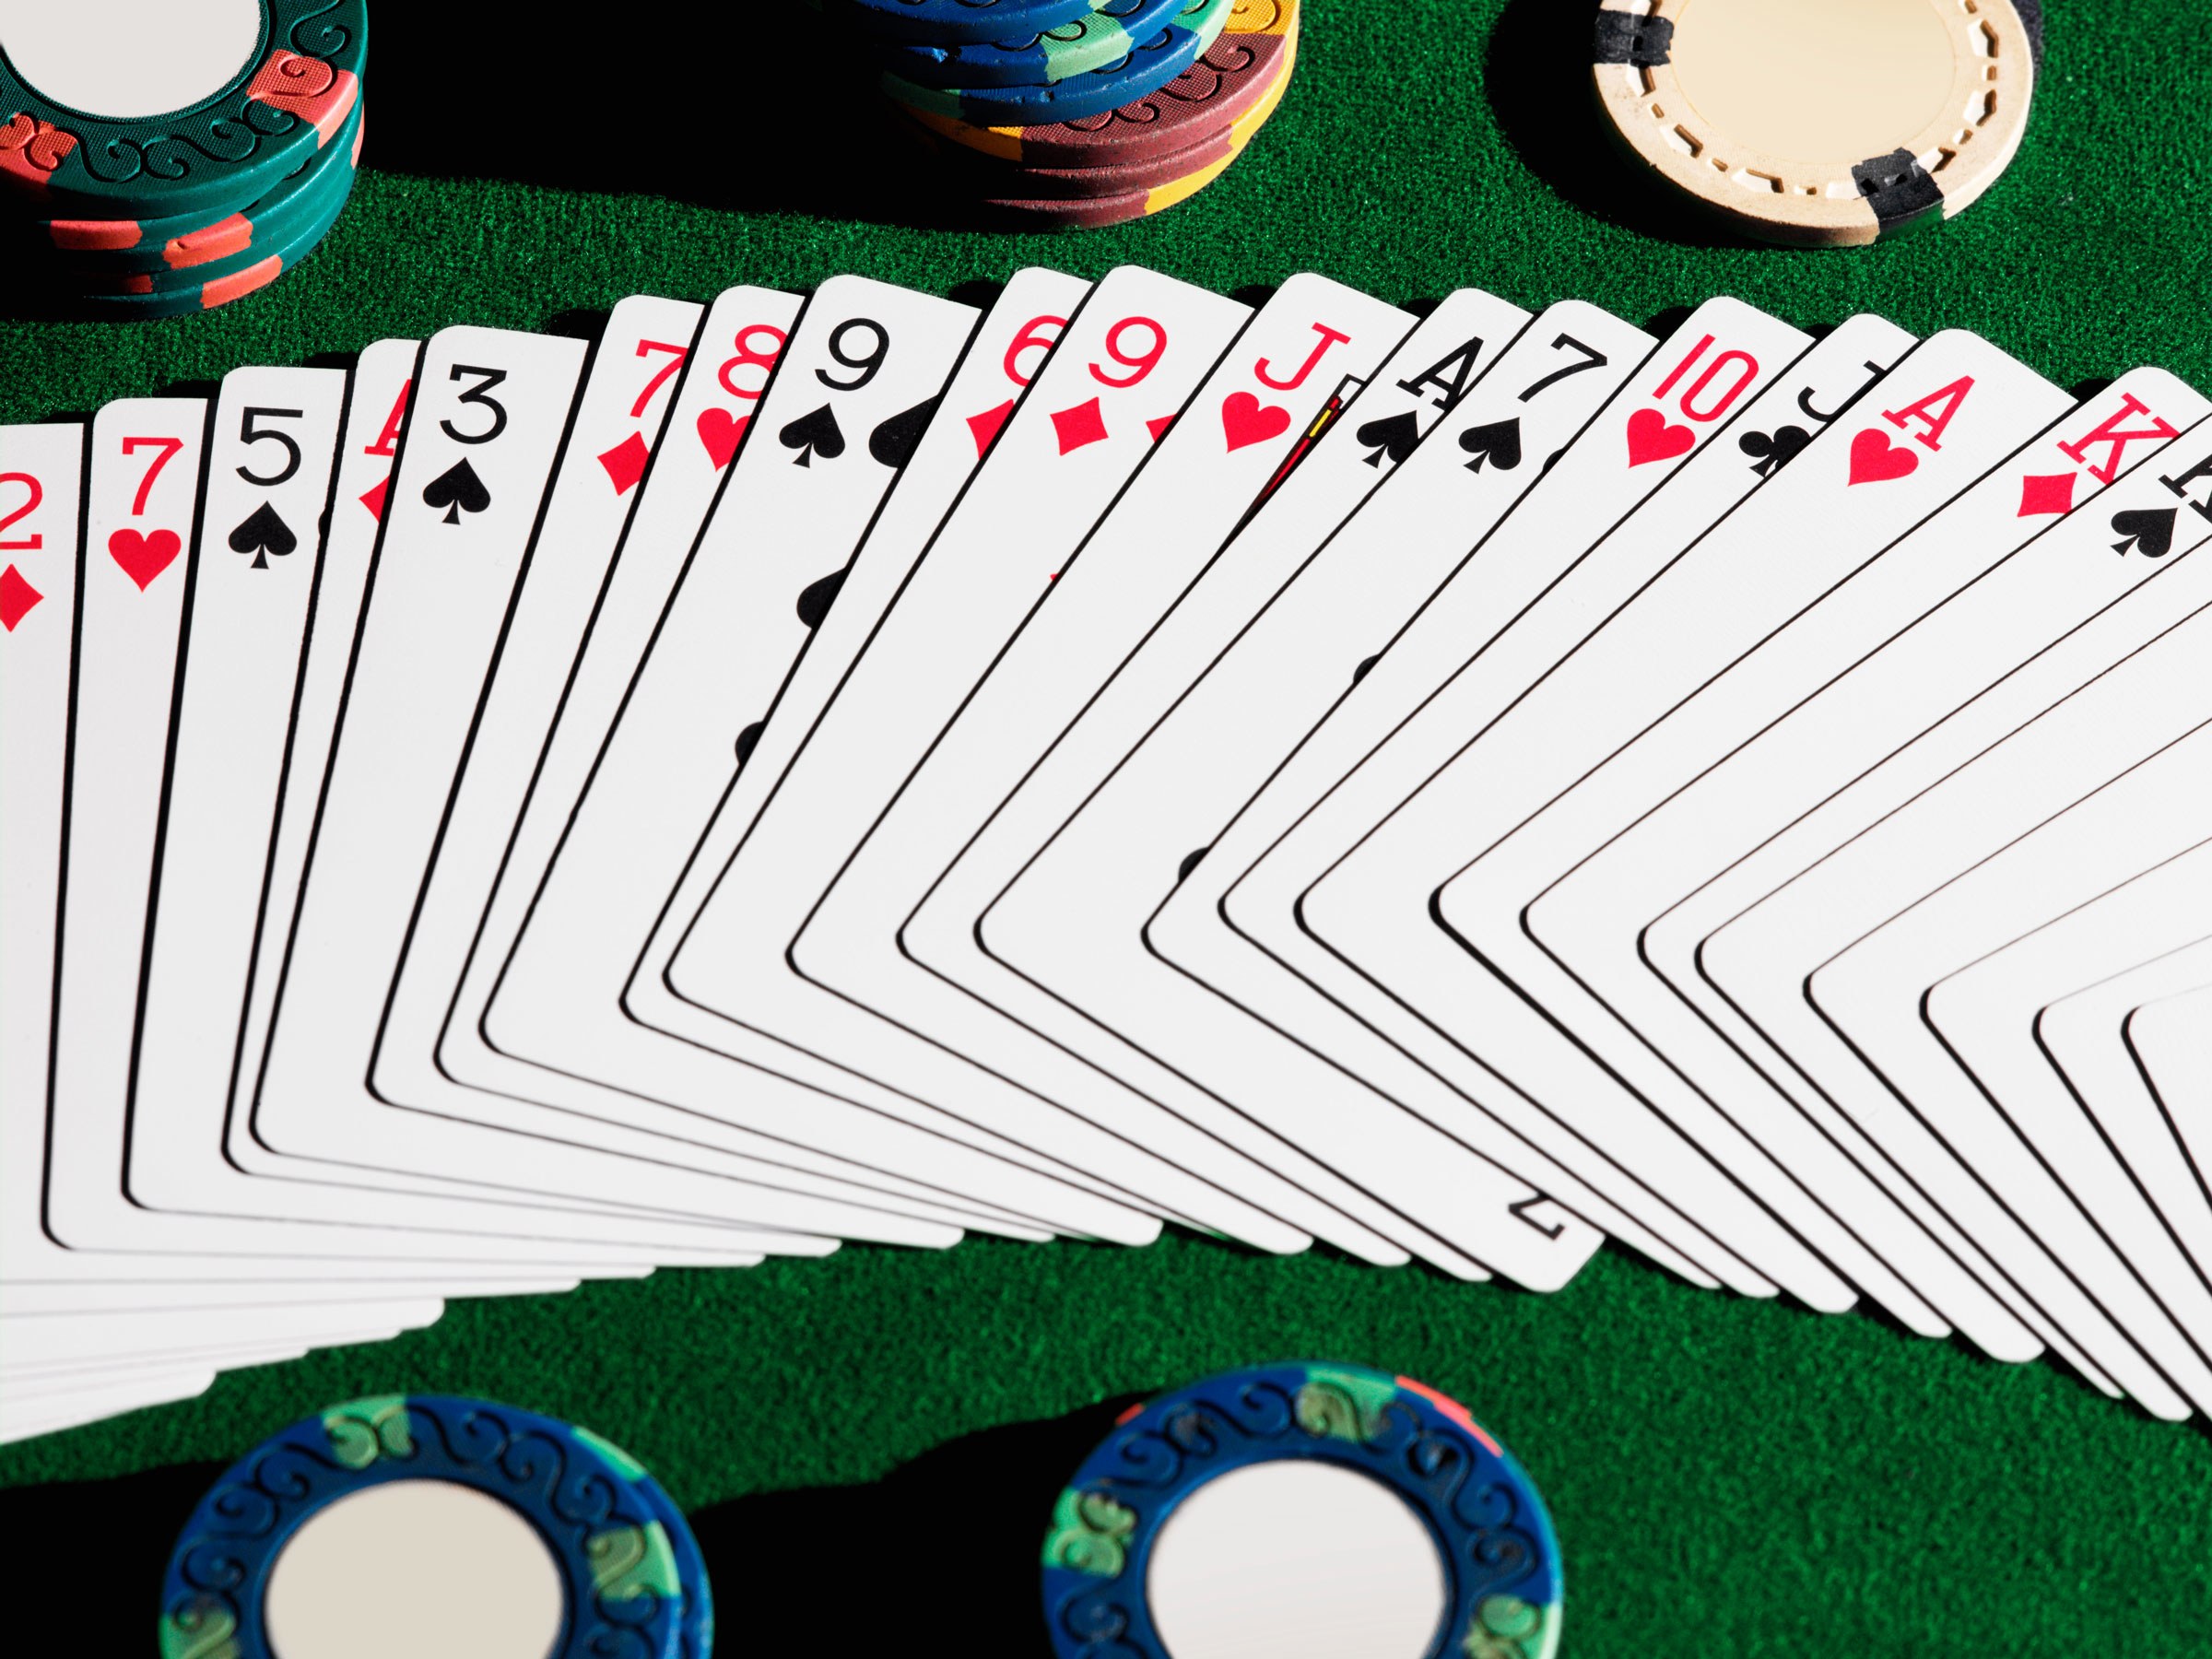 How to Know The Baccarat Strategies